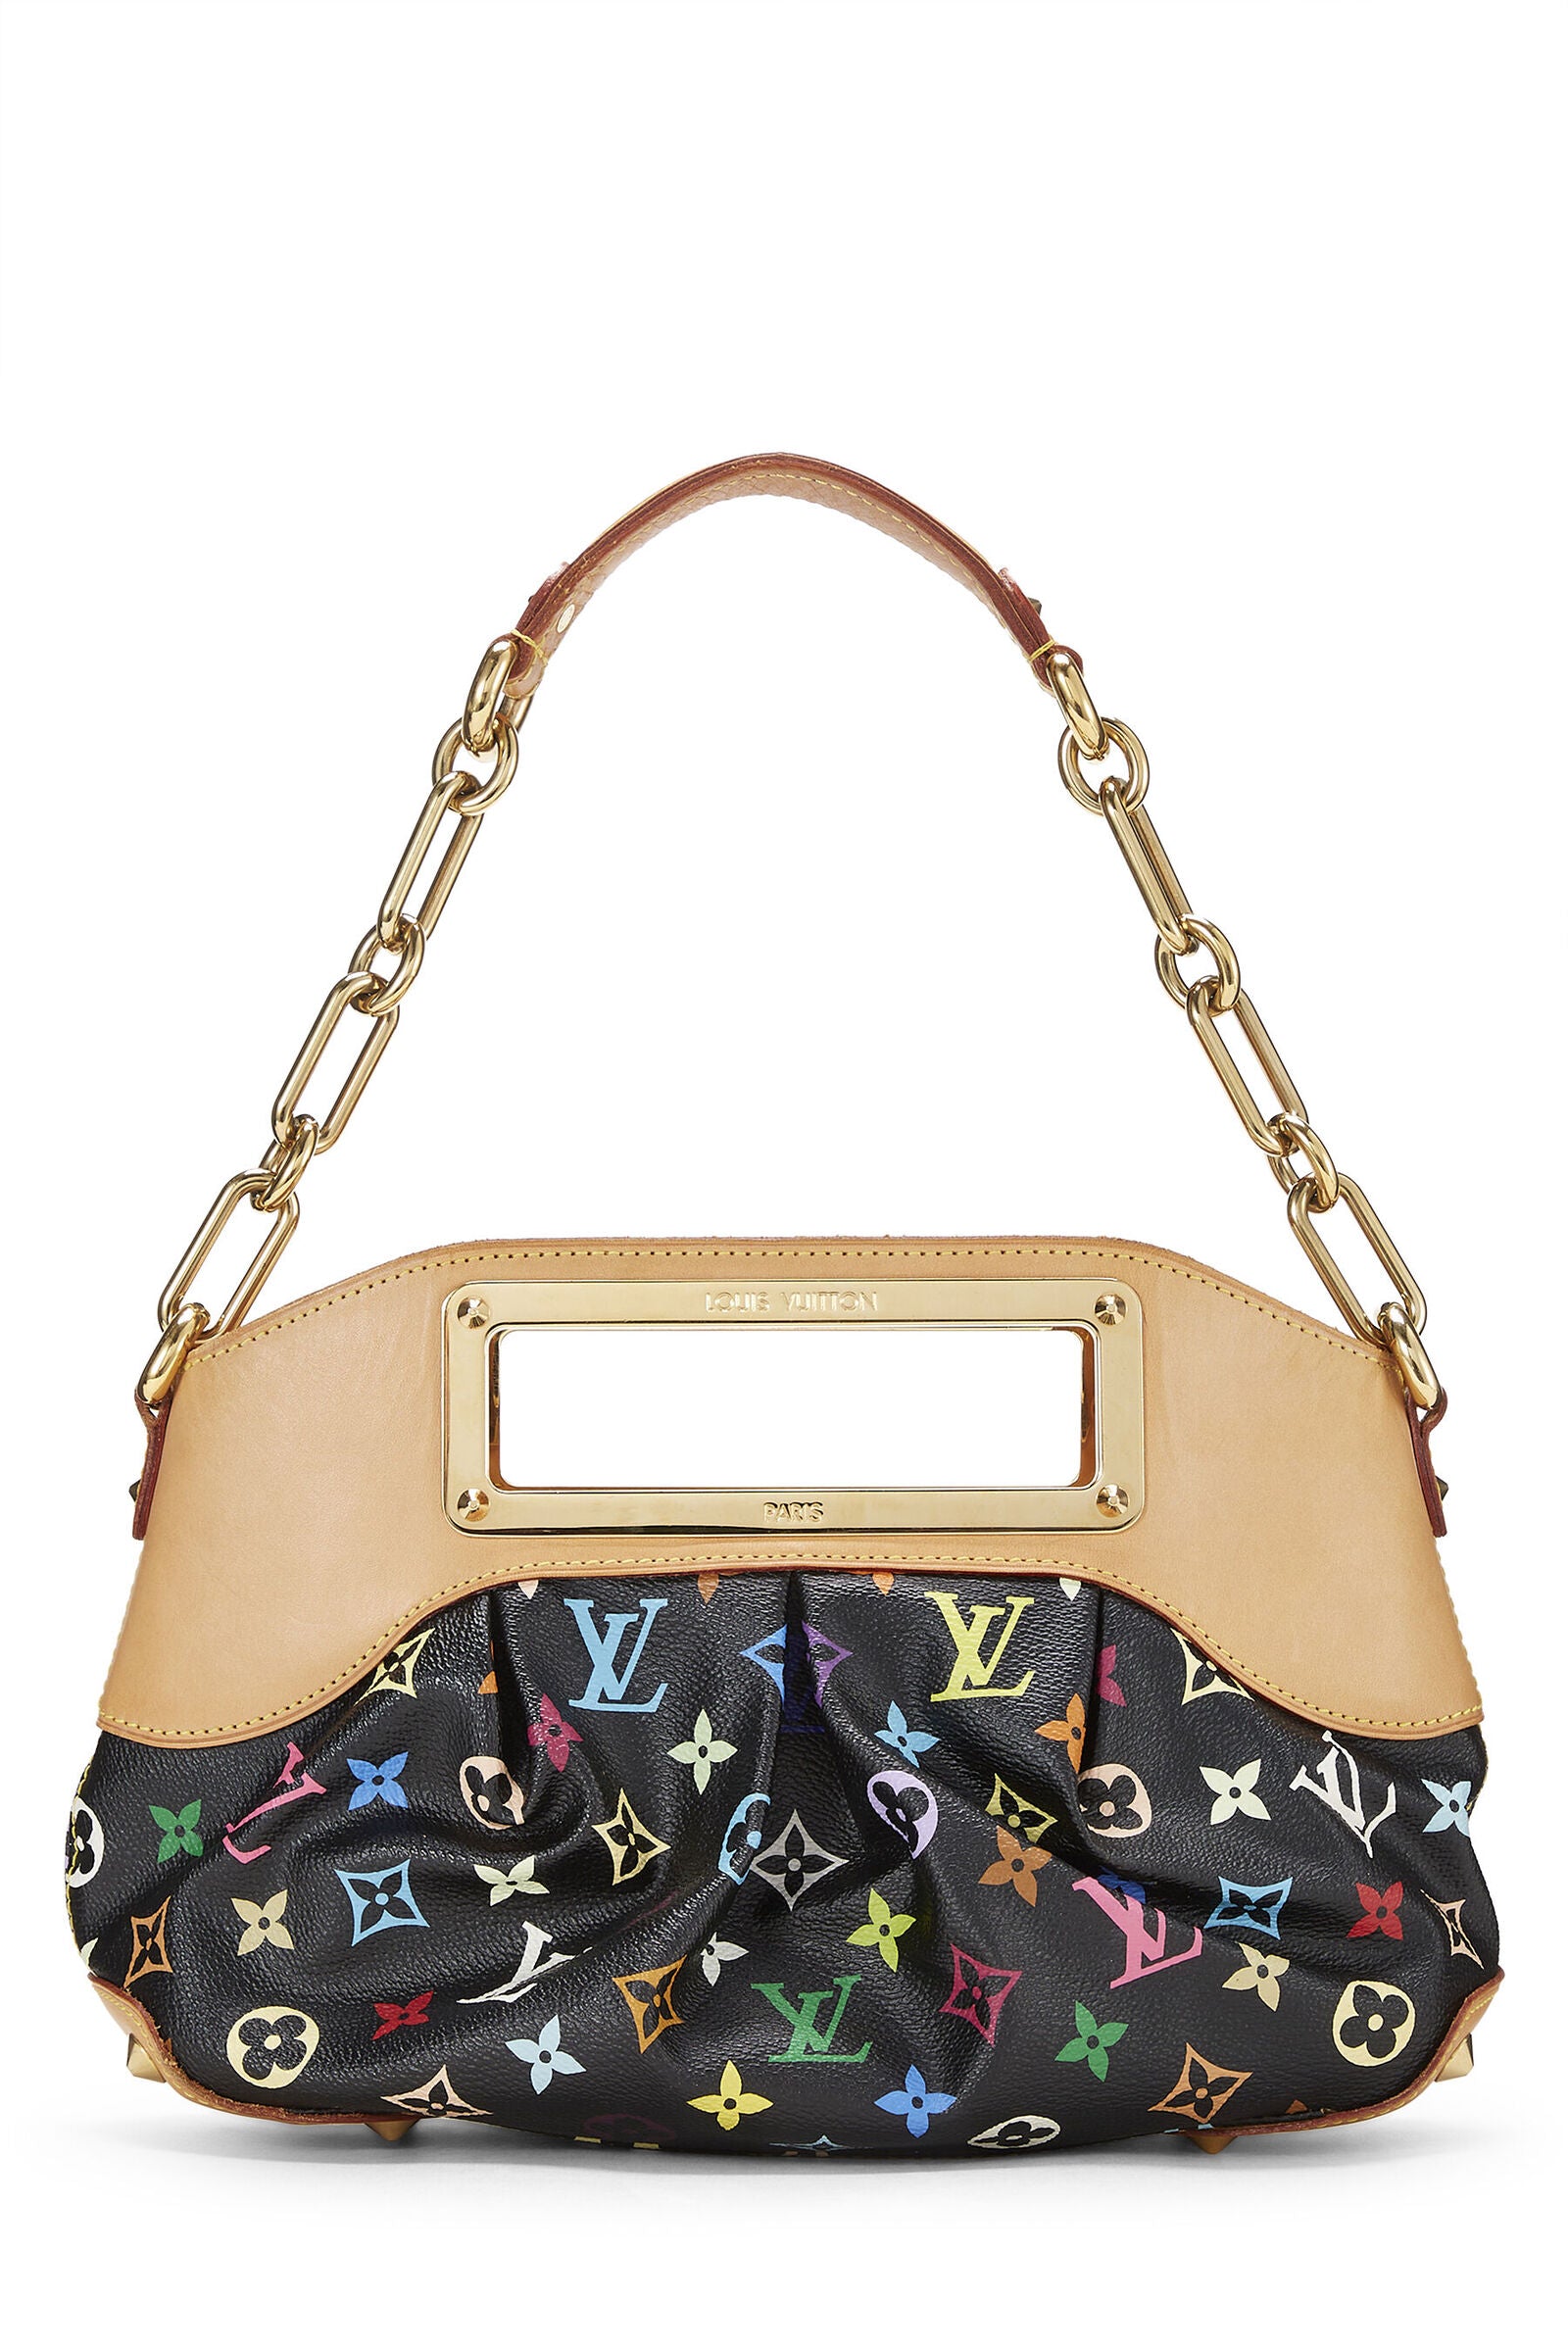 A Collectible Limited Edition Louis Vuitton Cannes Monogram